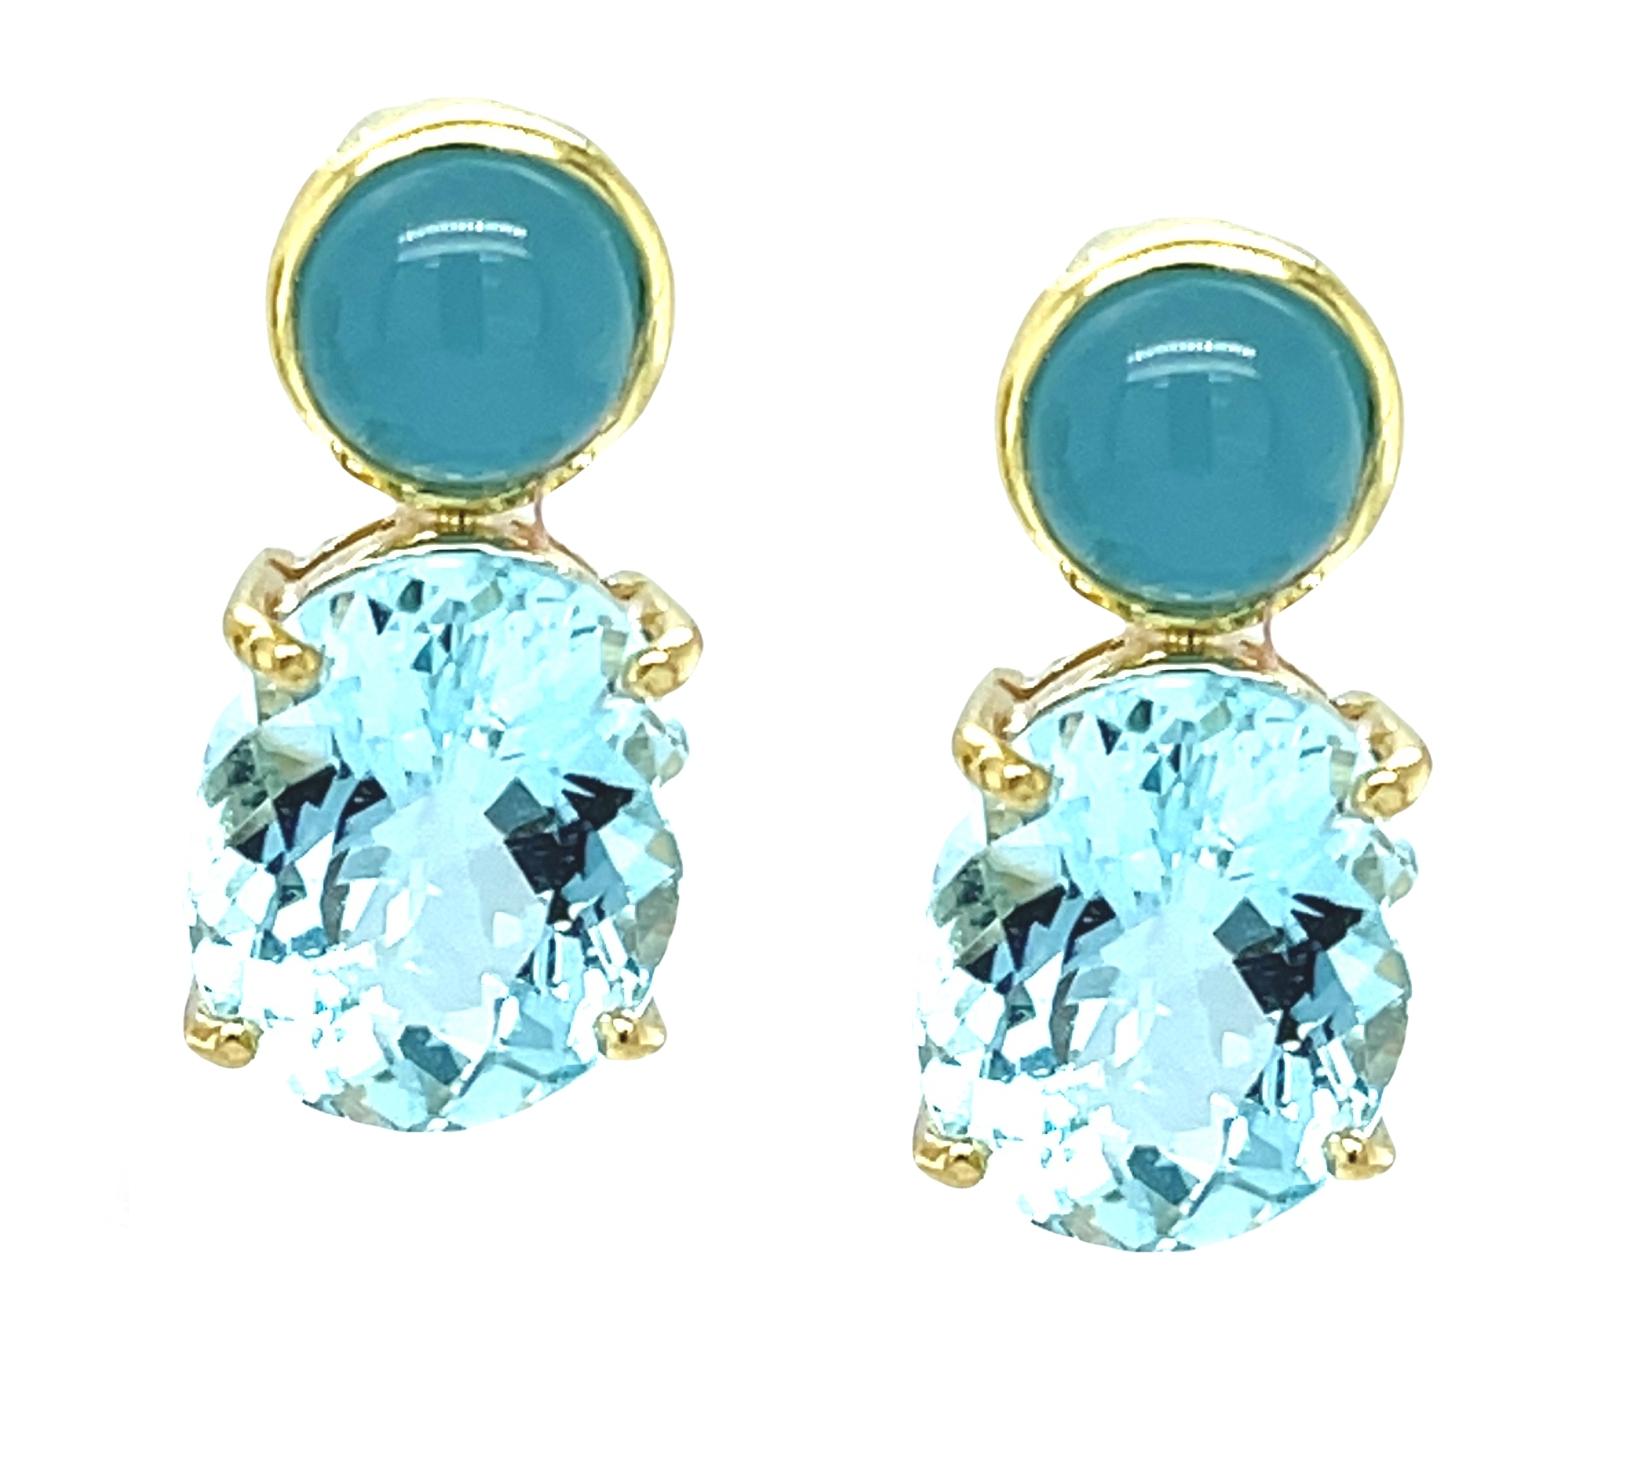 These beautiful earrings feature over 8 carats of lovely blue aquamarines in both sparkling ovals and gorgeous cabochons! The faceted ovals are showcased in handcrafted yellow gold baskets, while the round cabochons are set in bezels for a